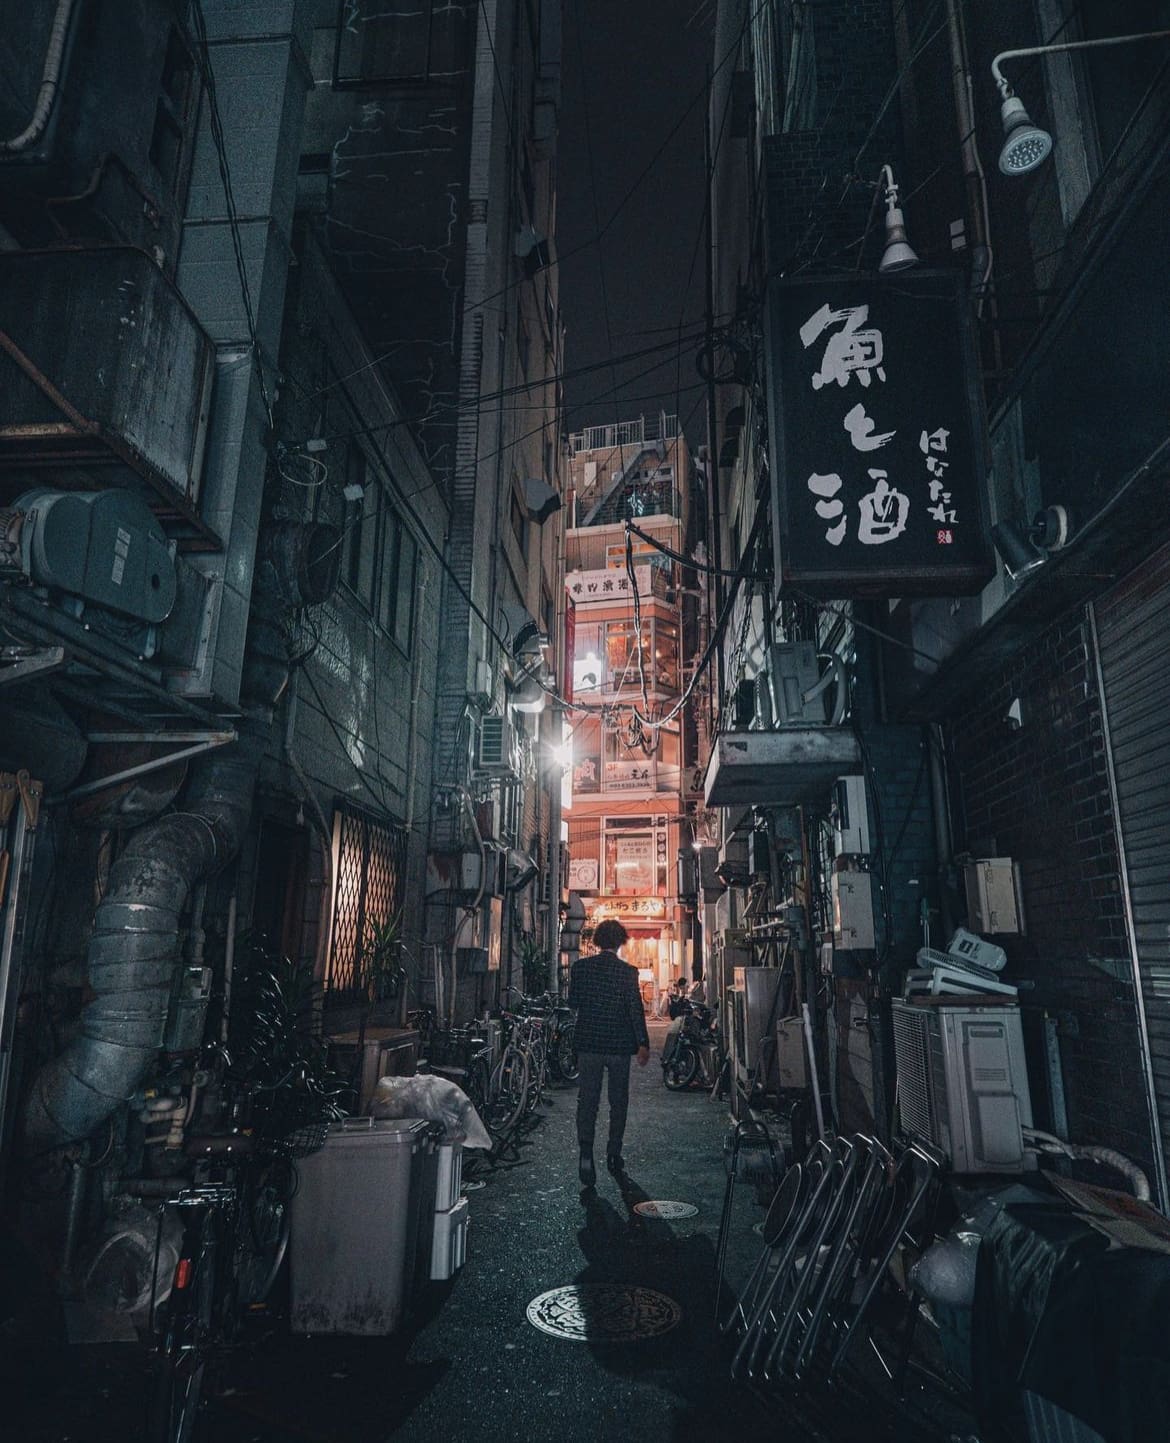 A typical street scene in Tokyo